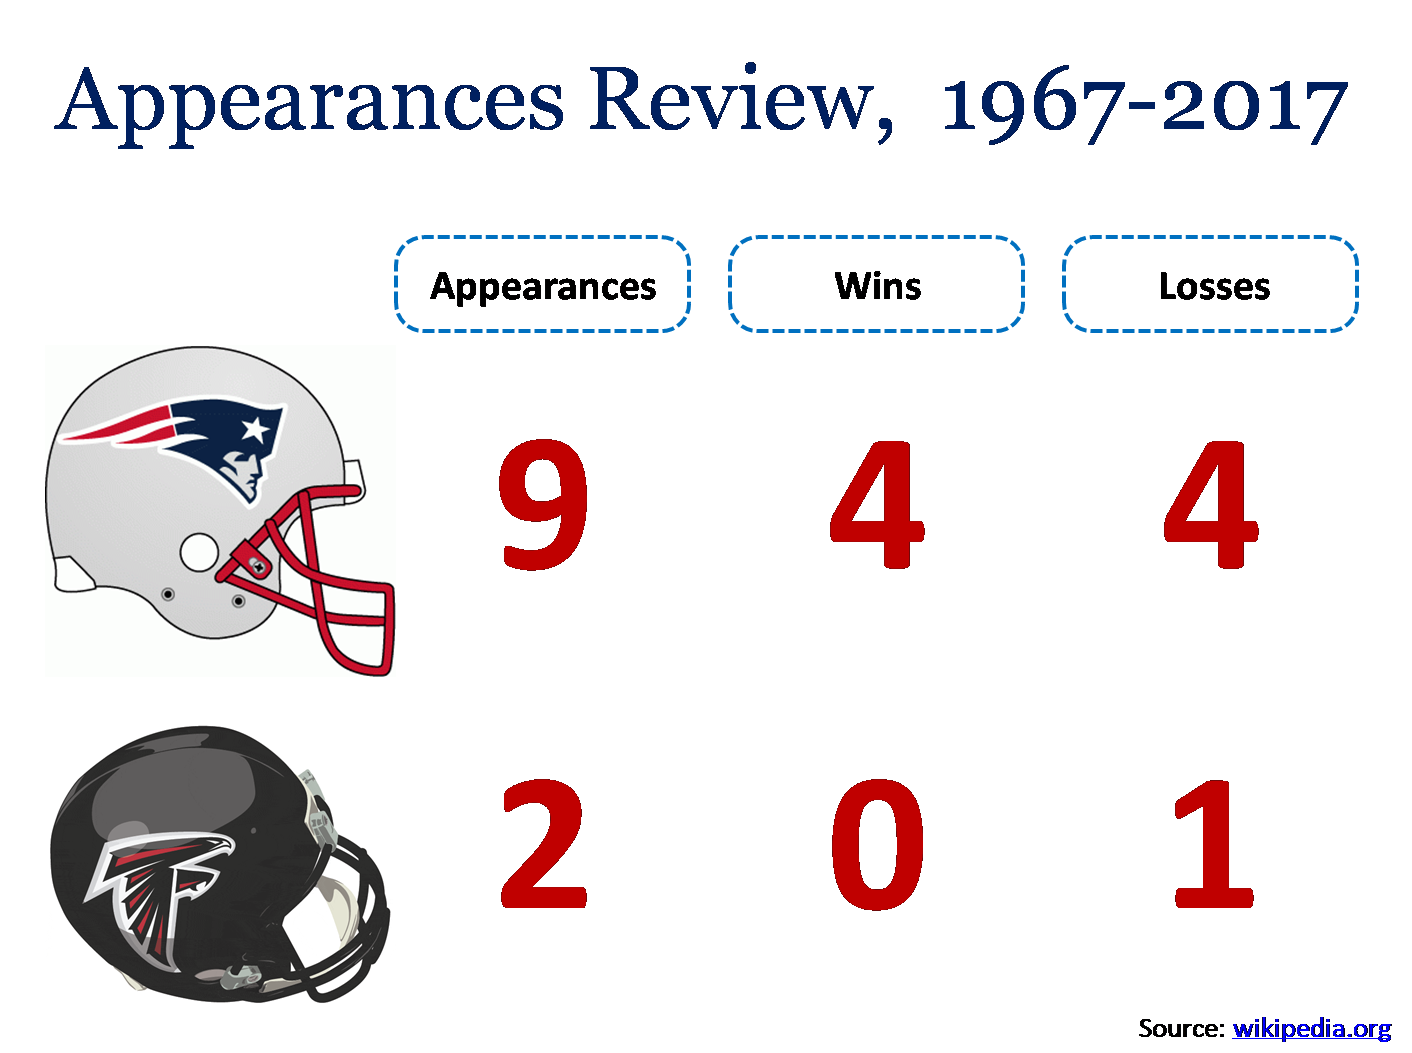 Super Bowl Appearances Review from 1967 to 2017 for the two competing teams, namely, the New England Patriots and Atlanta Falcons